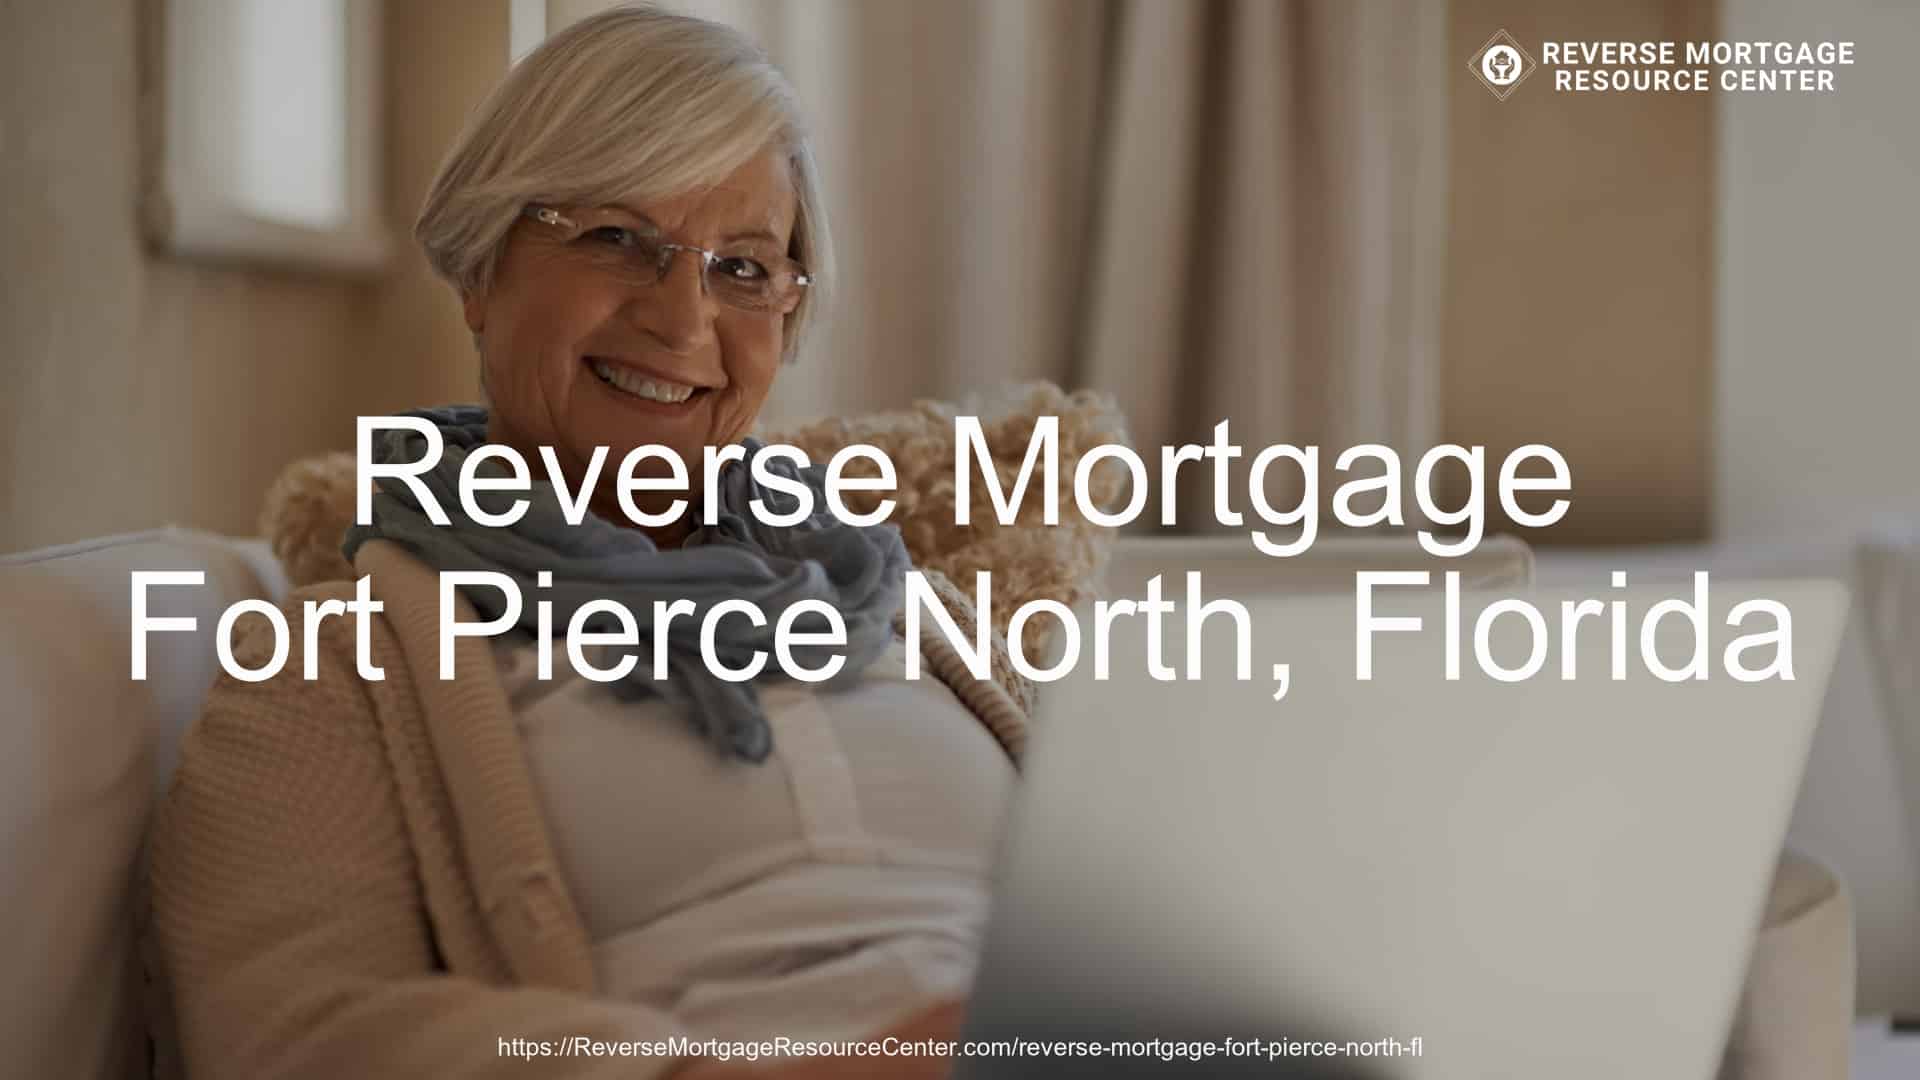 Reverse Mortgage Loans in Fort Pierce North Florida